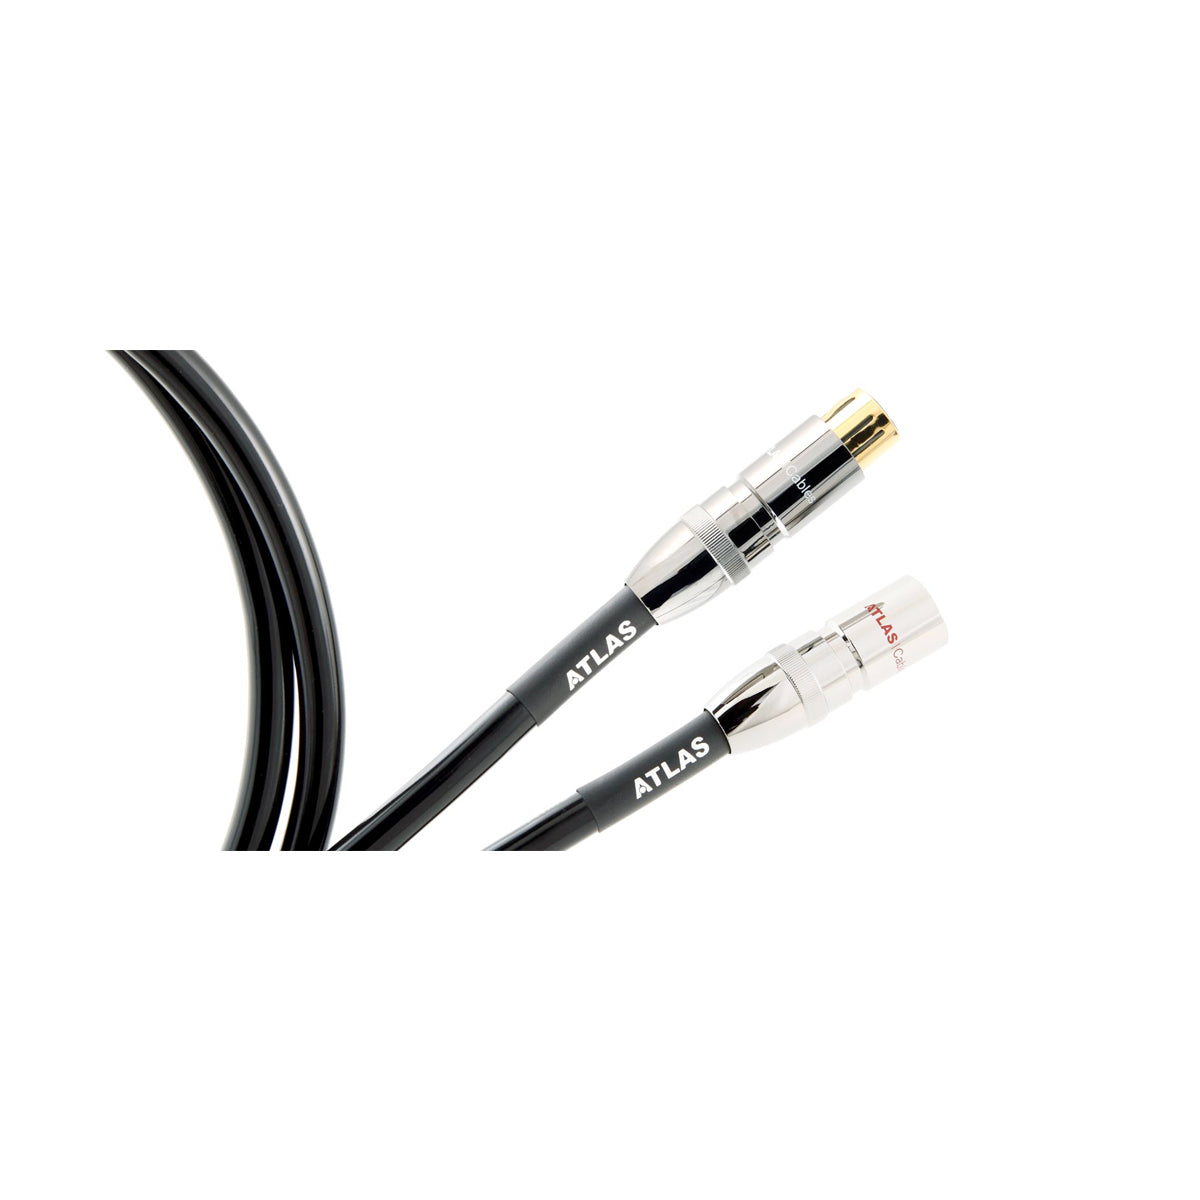 ATLAS Hyper OCC XLR Balanced Interconnect Cable - The Audio Experts